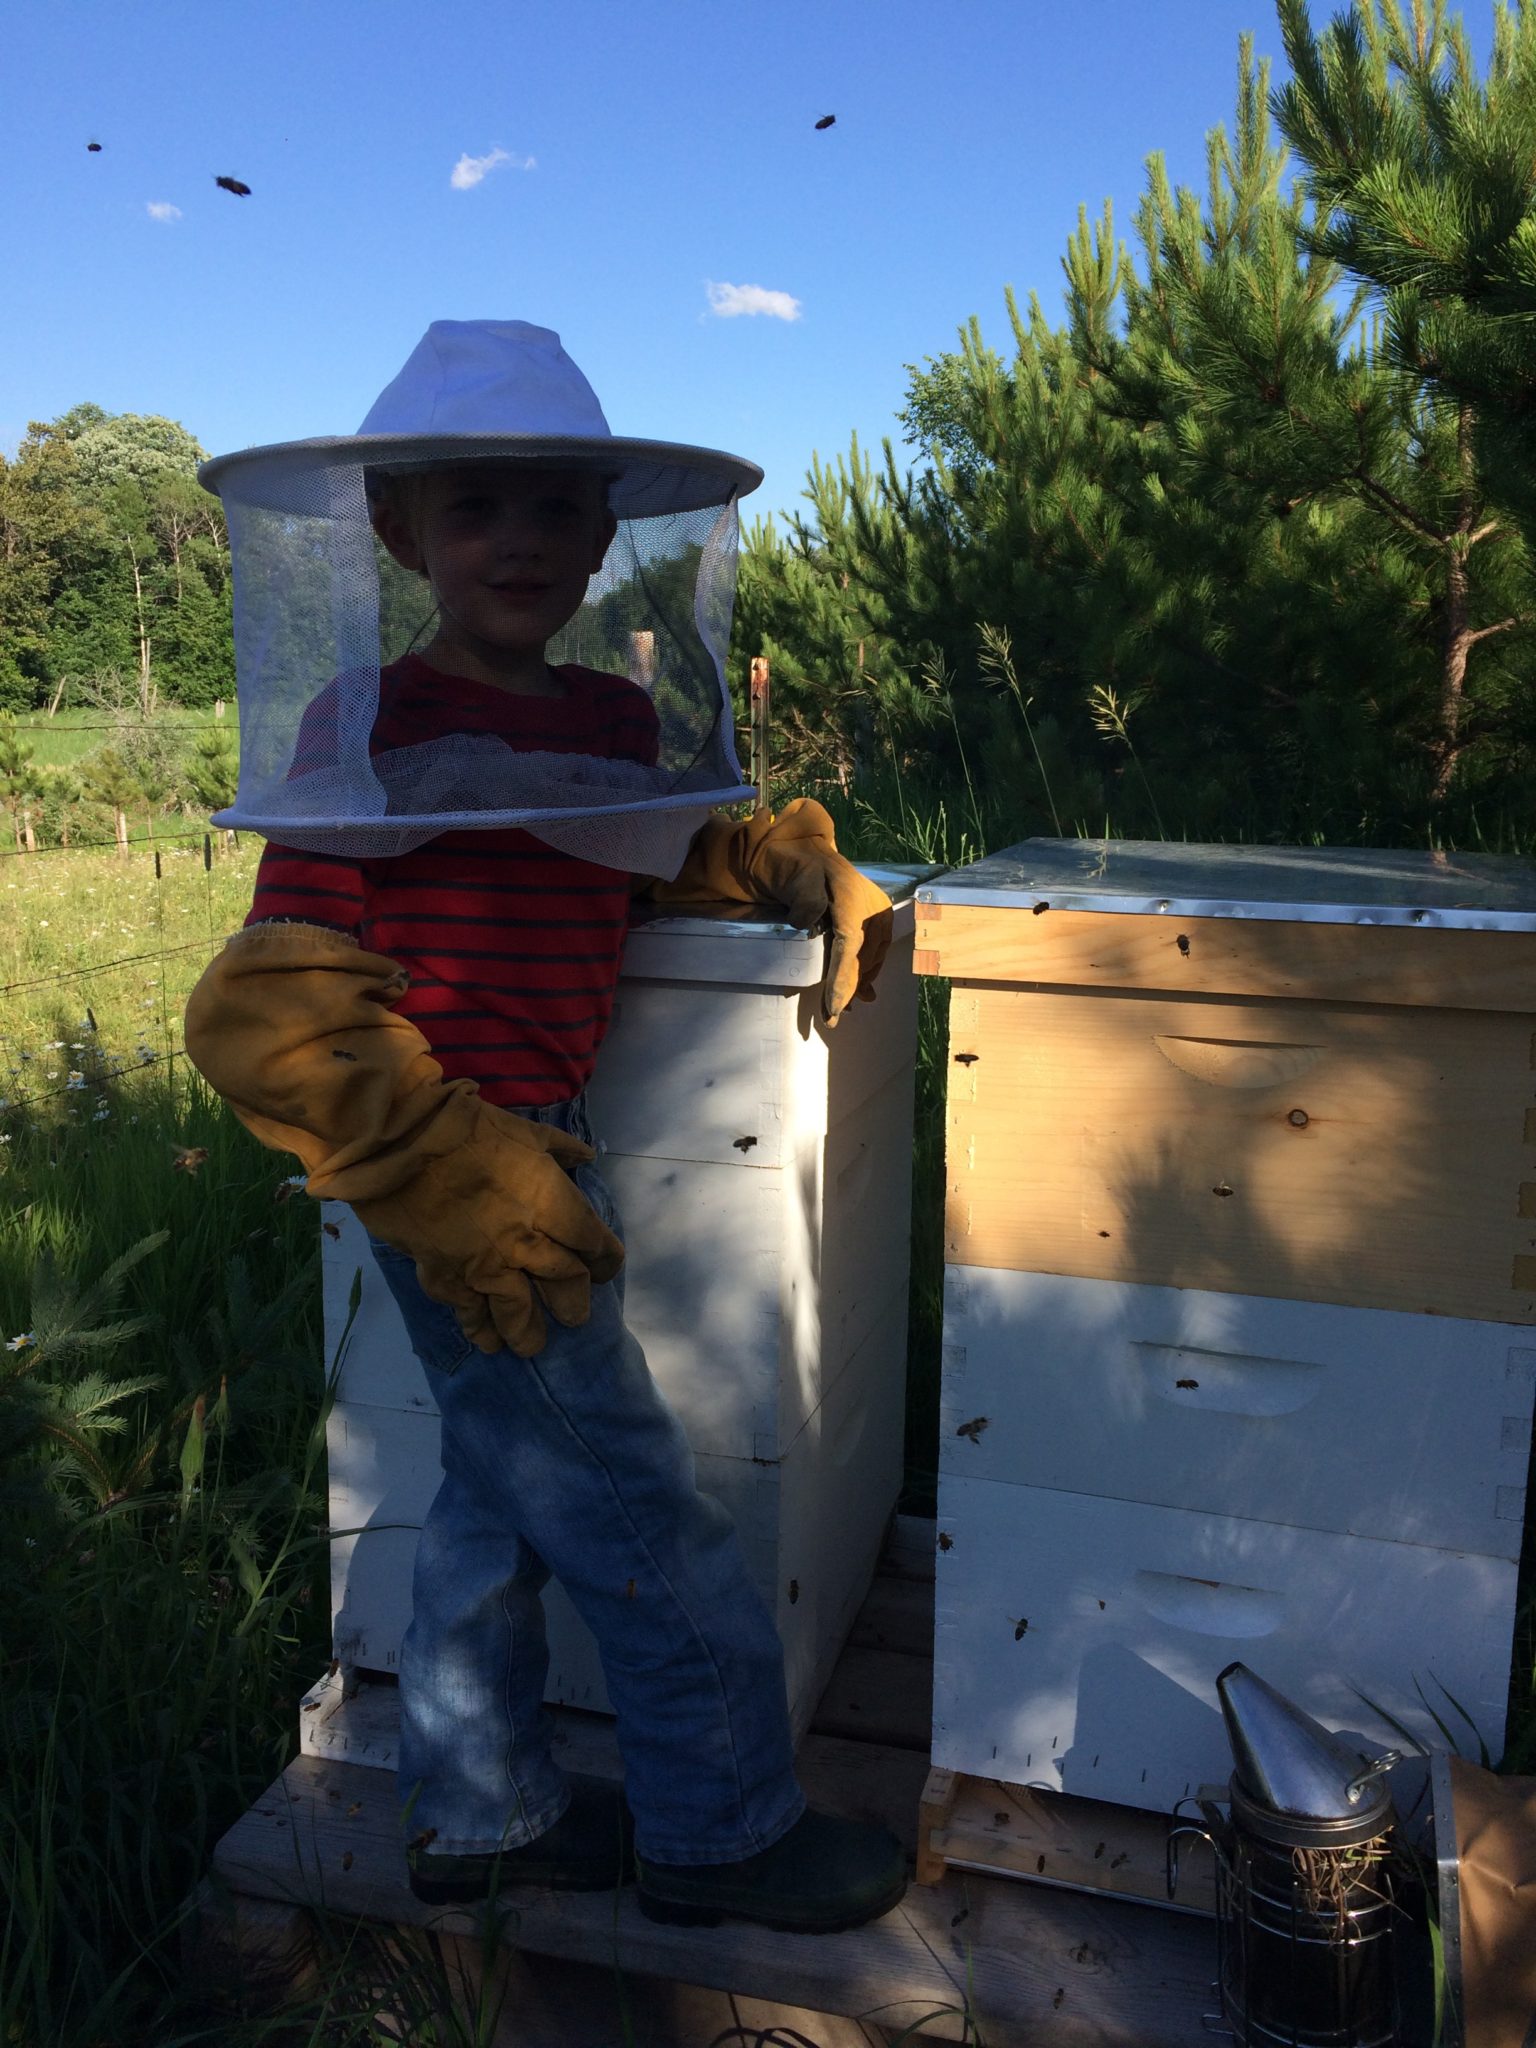 little boy around 7 years old wearing protective bee keeping gear standing by hive boxes